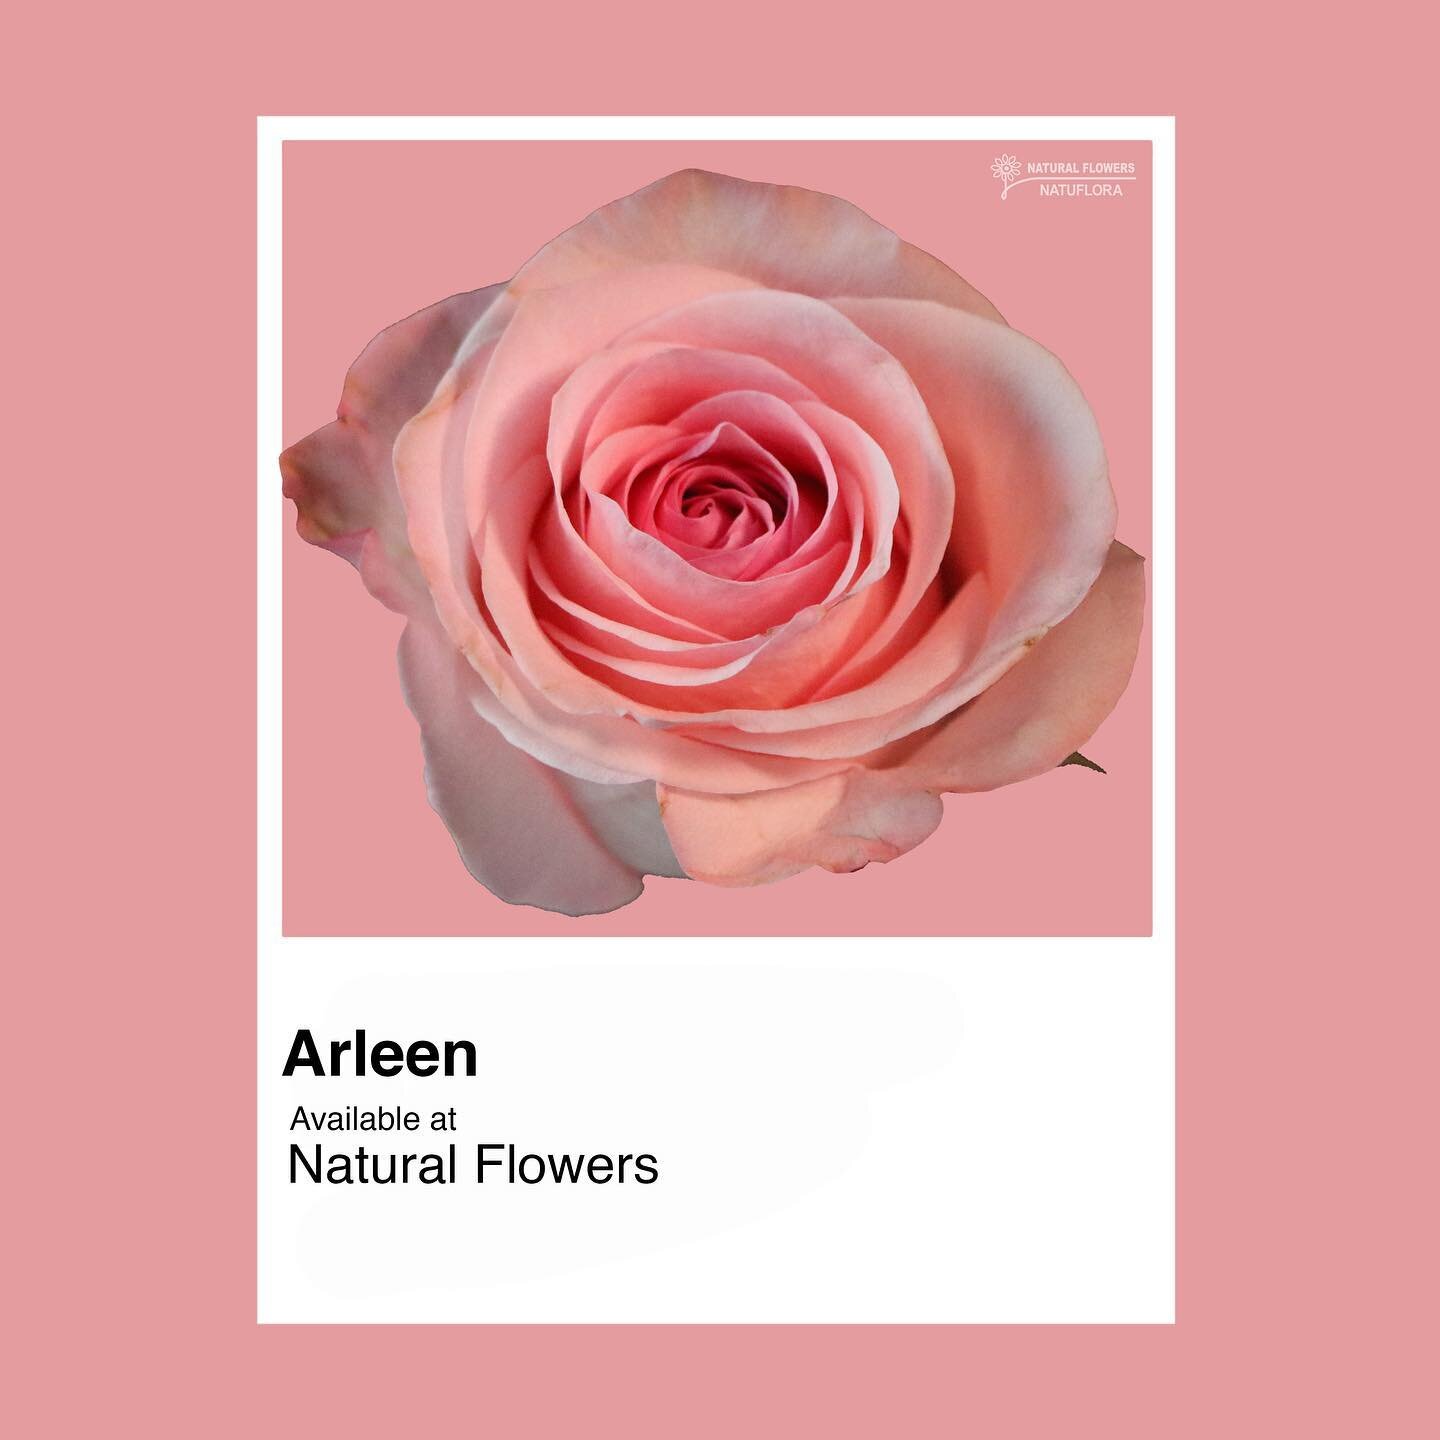 Arleen Rose ✨ medium Pink, perfect splash of color for any bouquet or arrangement. 
Contact us for availability! sales@nflowers.com 
.
.
.
.
.
.
.
.
#arleen #rose #pink #available #bridalbouquet #inspo #floralinspo #wholesales #massmarket #colors #pa